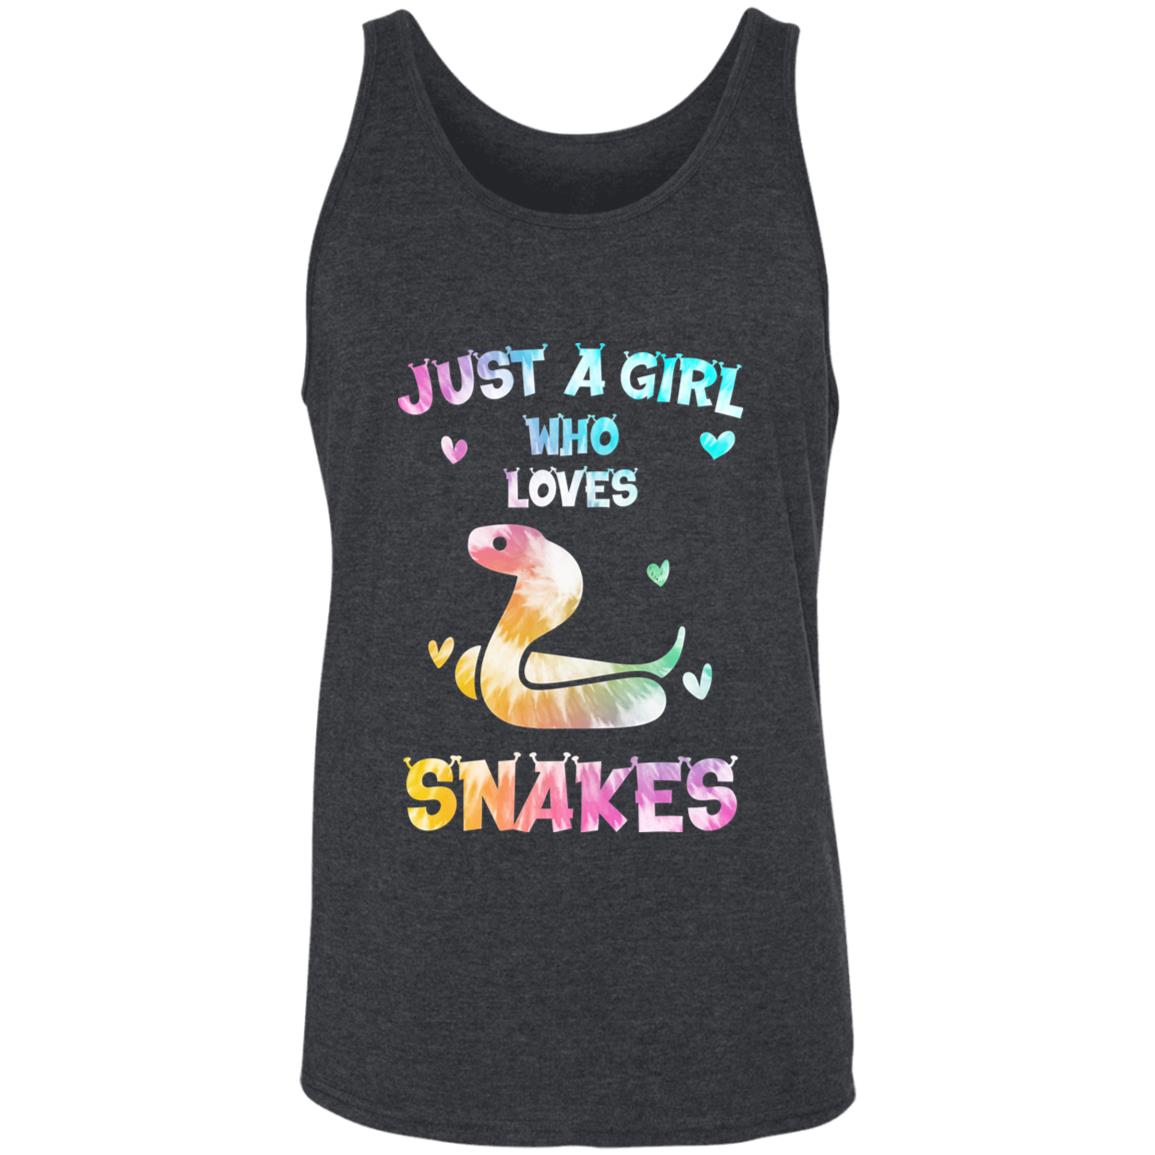 Just A Girl Who Loves Snakes - Unisex Tank Top